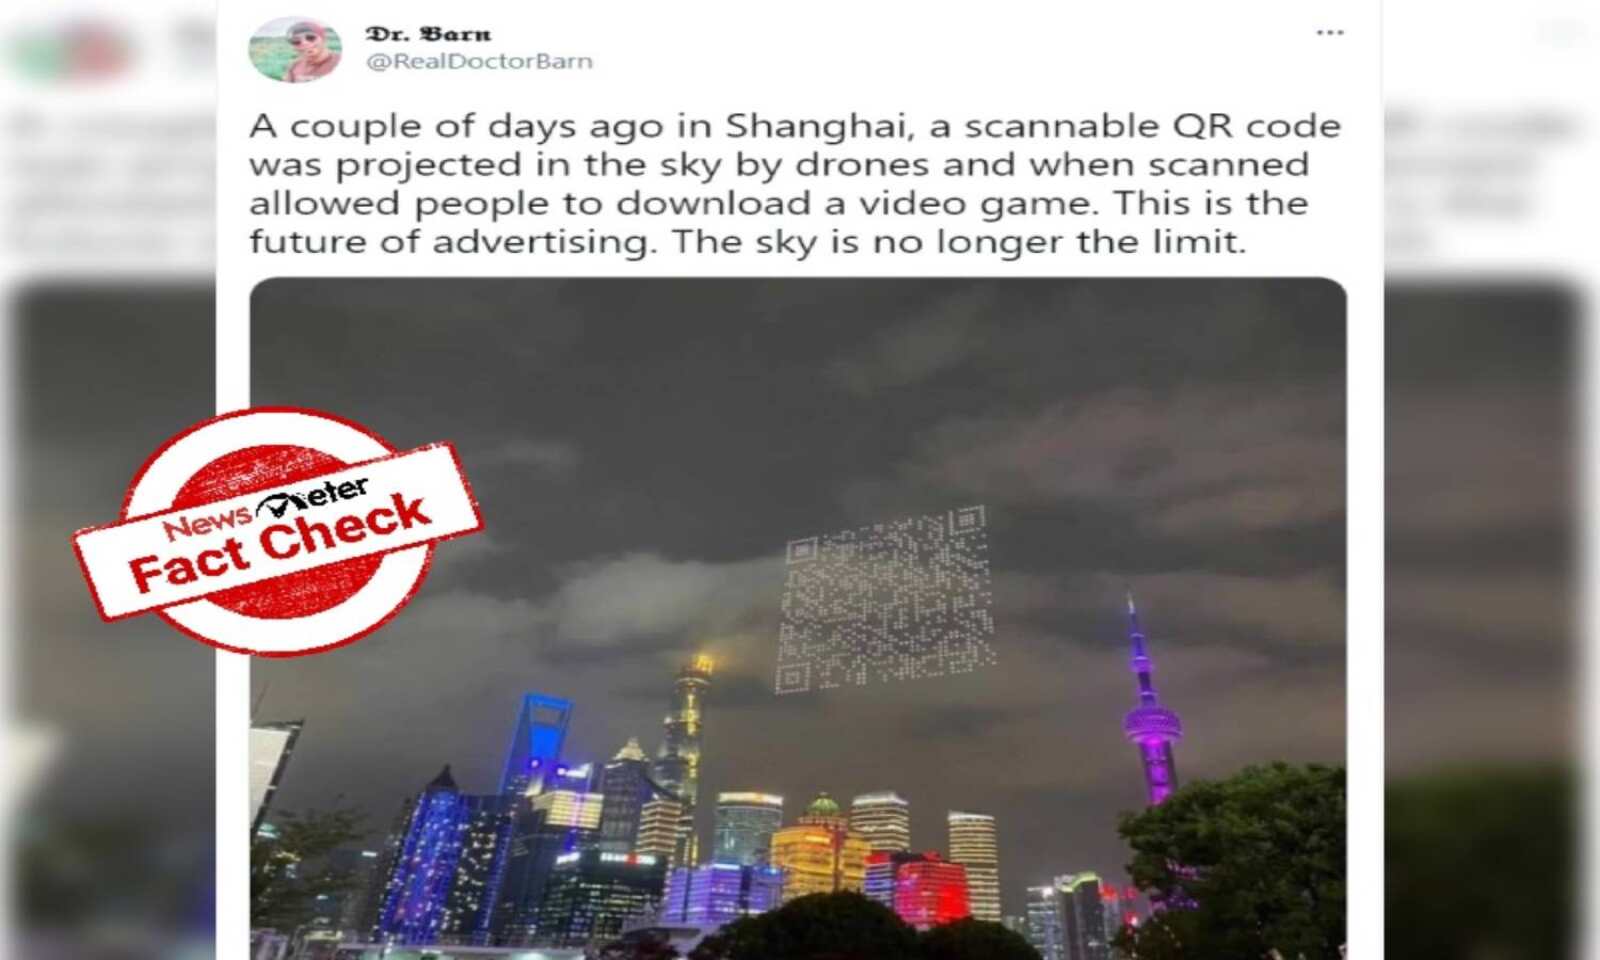 Fact Check True Scannable Qr Code Projected On Shanghai S Skies For People To Download Video Game